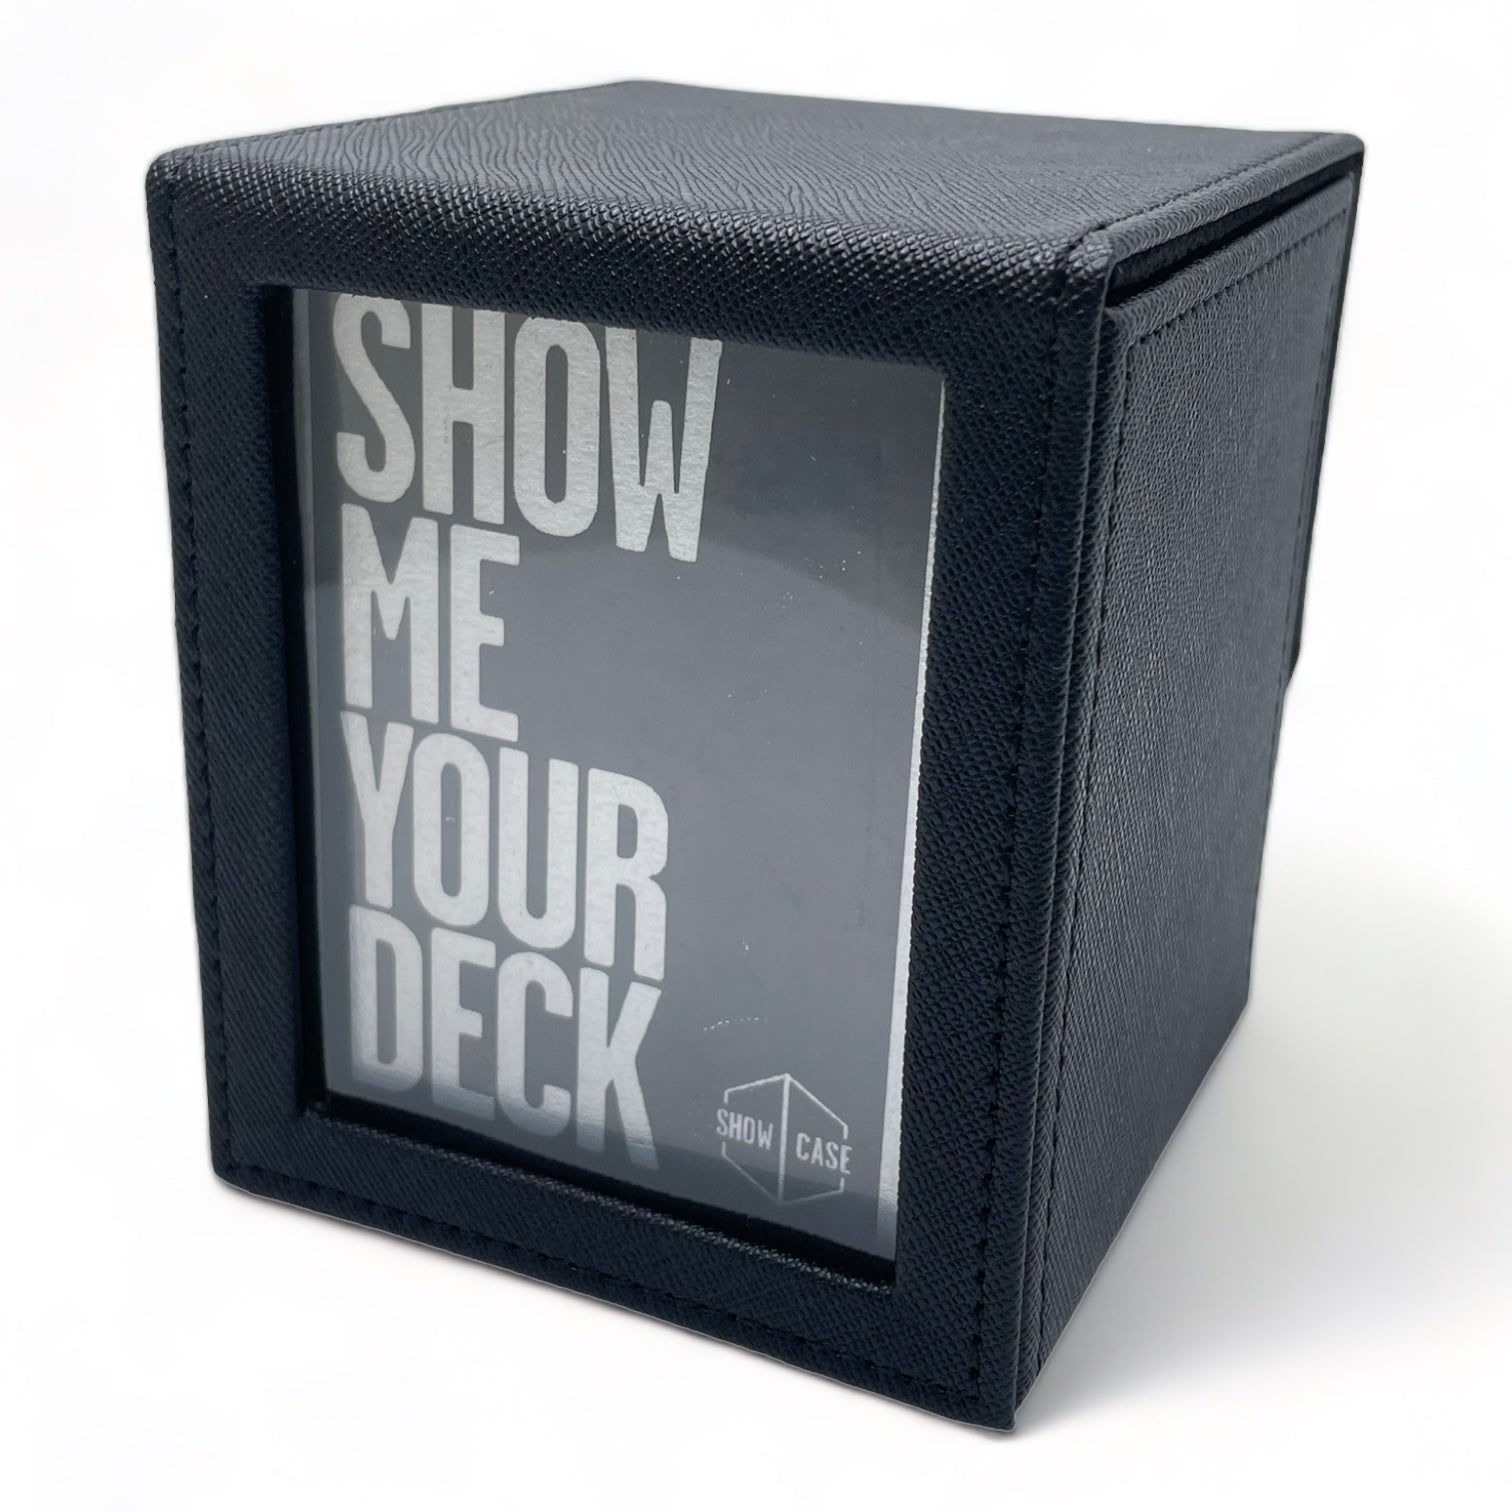 Deck Box in black with Window showcasing a card that says "Show me your deck"